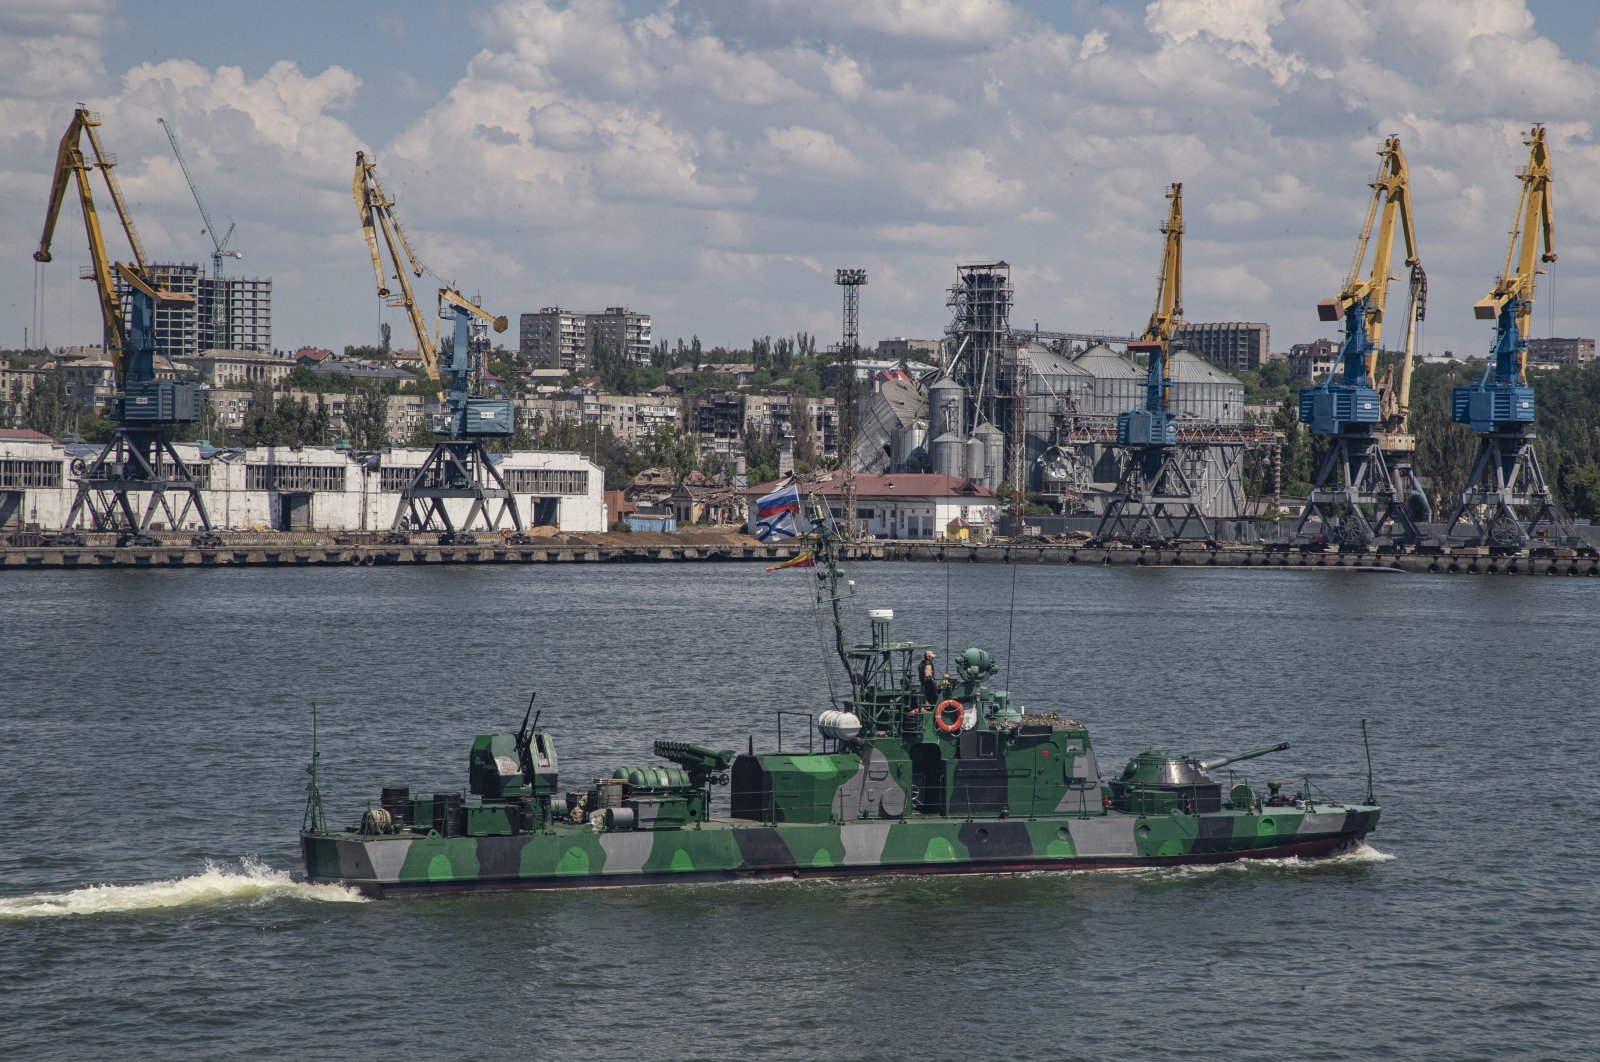 A picture taken during a visit to Mariupol organized by the Russian military shows a Russian navy ship on guard in the cargo sea port of Mariupol, Ukraine, June 12, 2022. (EPA Photo)